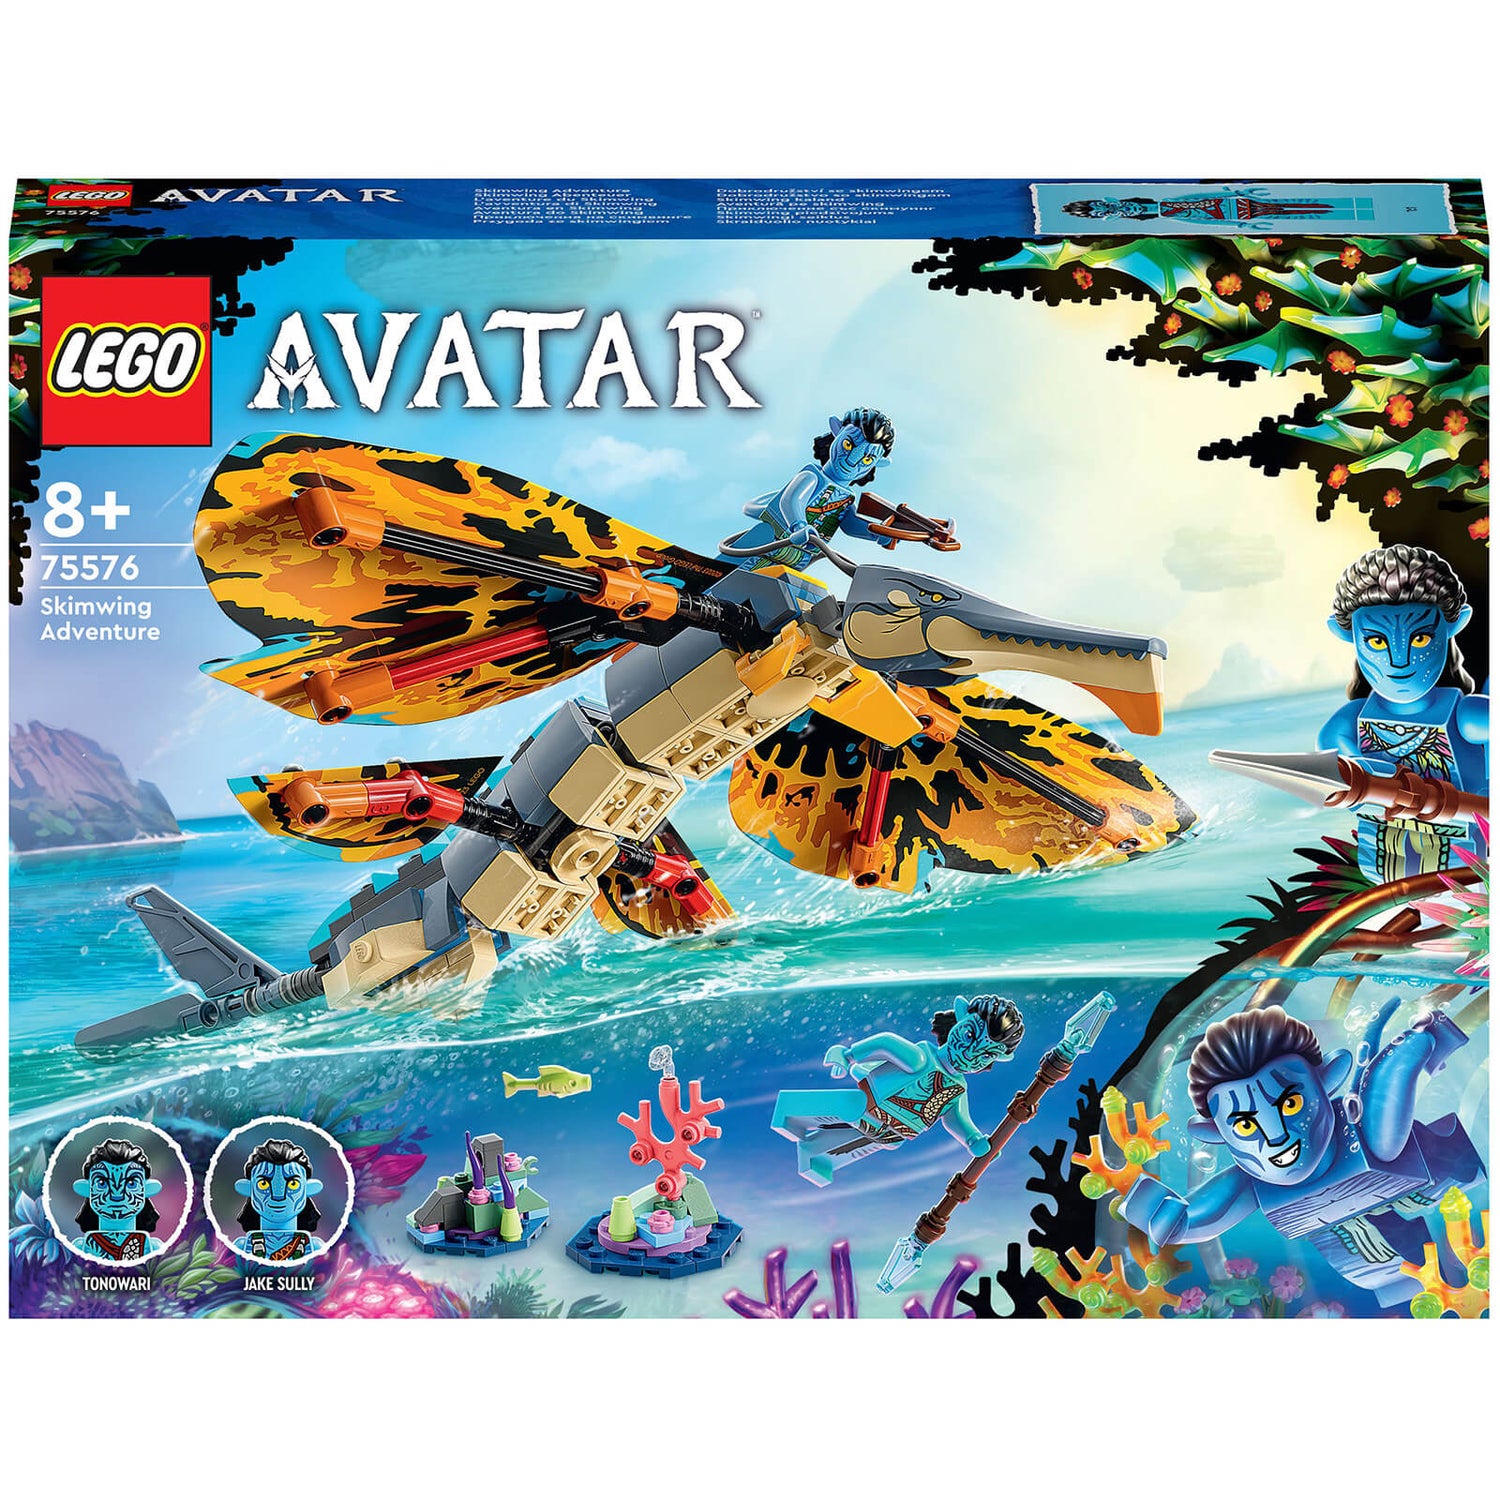 Avatar: The Way of Water Lego sets bring Pandora into your home